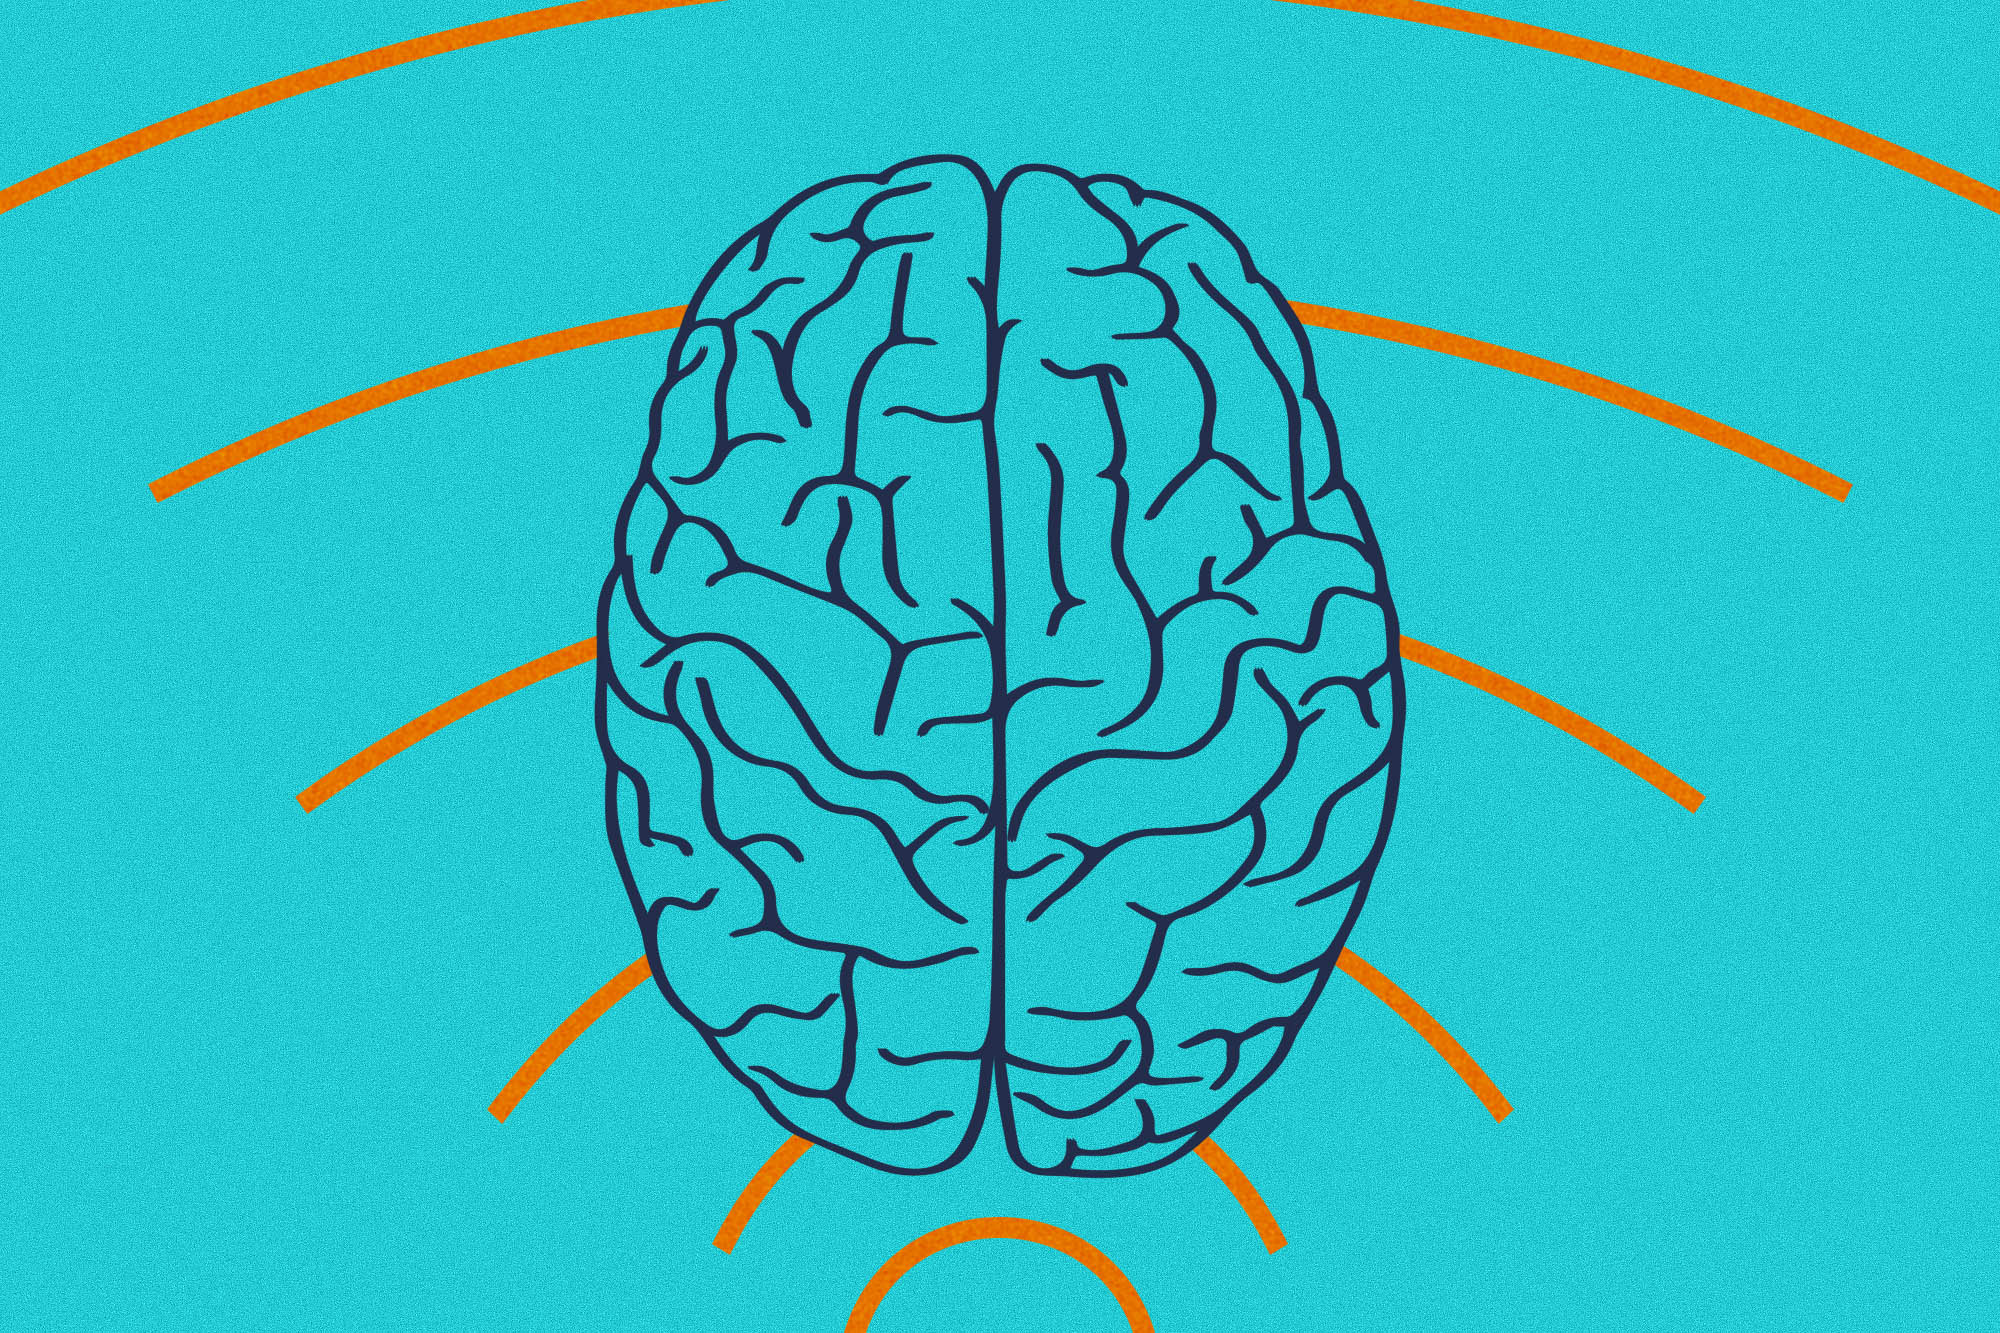 illustration of a brain with wifi signal behind it on a blue background